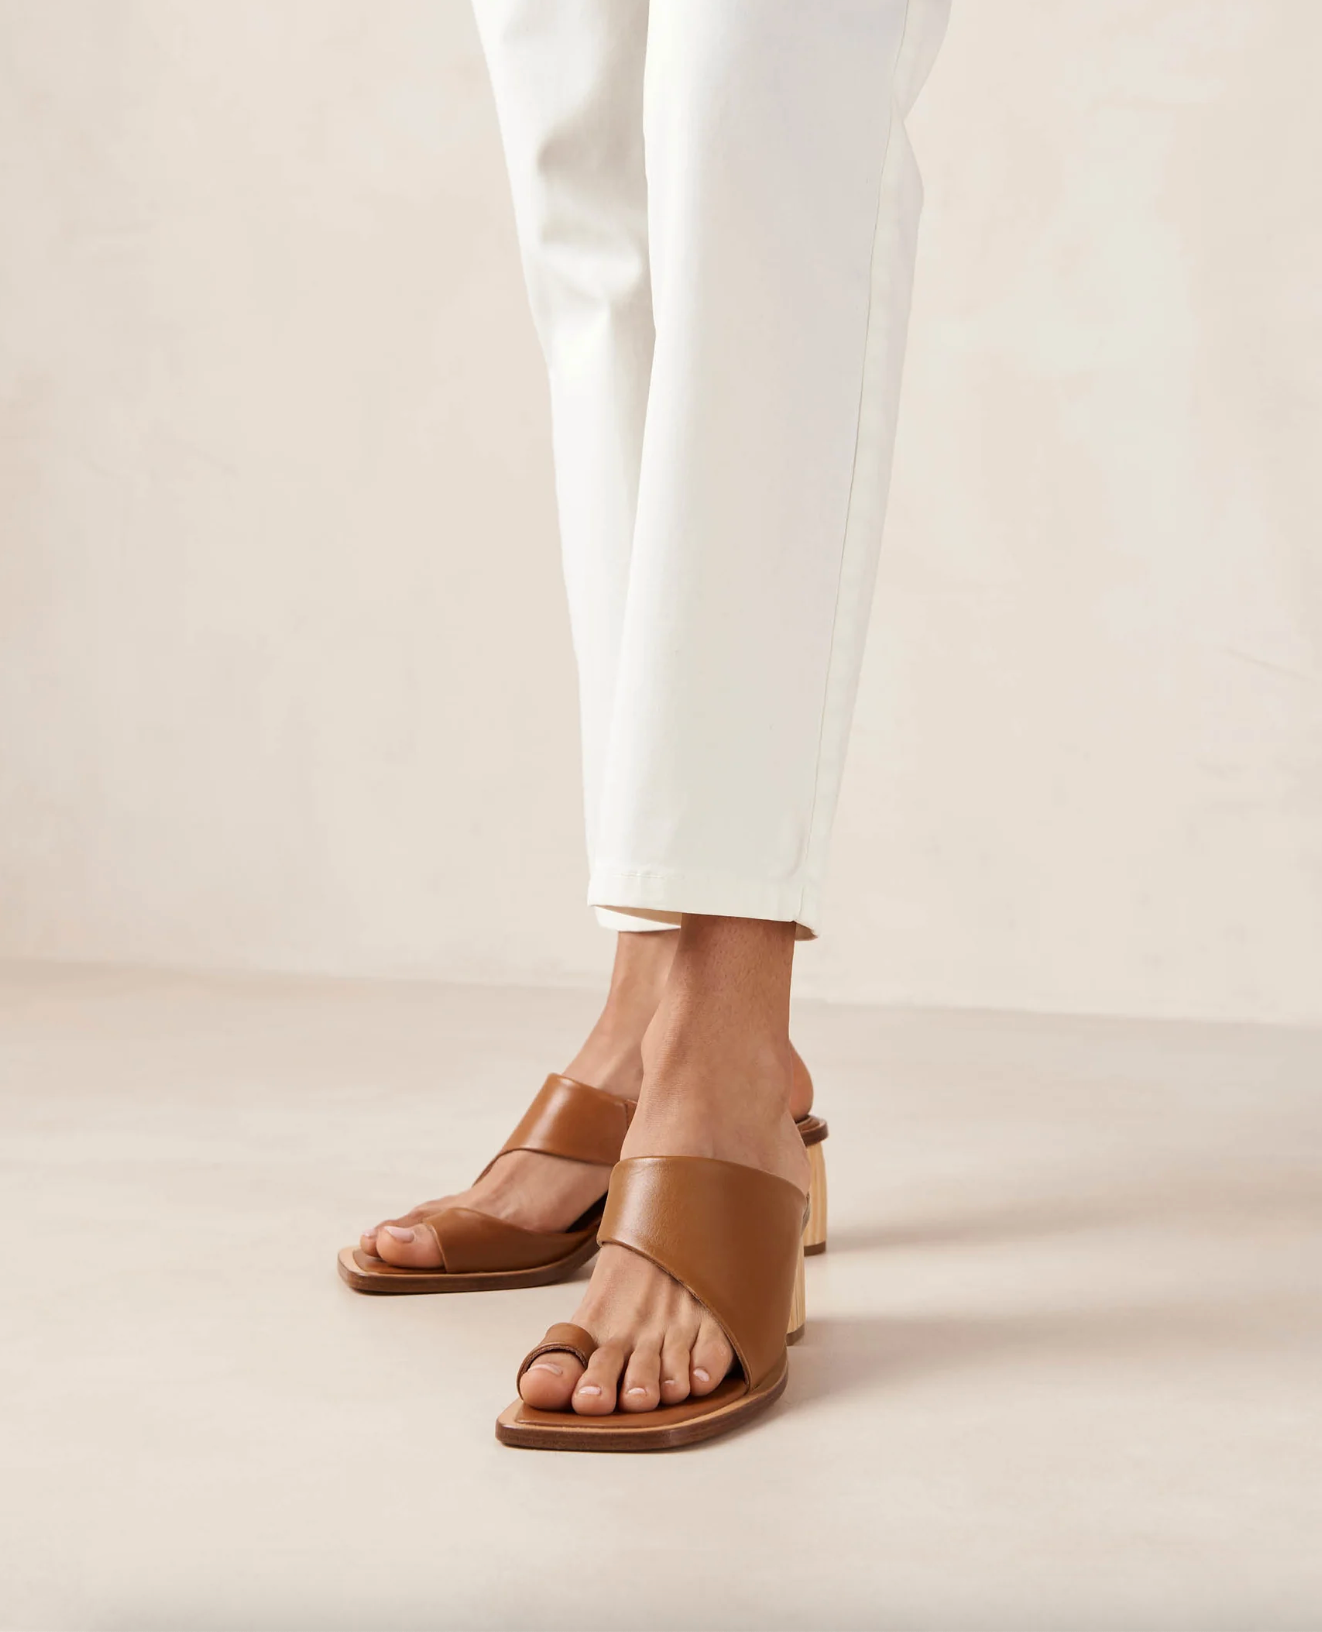 With only a toe ring and front strap, the Josie sandals slip on with ease like a mule. Crafted from brown leather, they have wood-style block heels as well as padded insoles for cushioning and comfort.  Sustainably made in Portugal, designed in Barcelona.